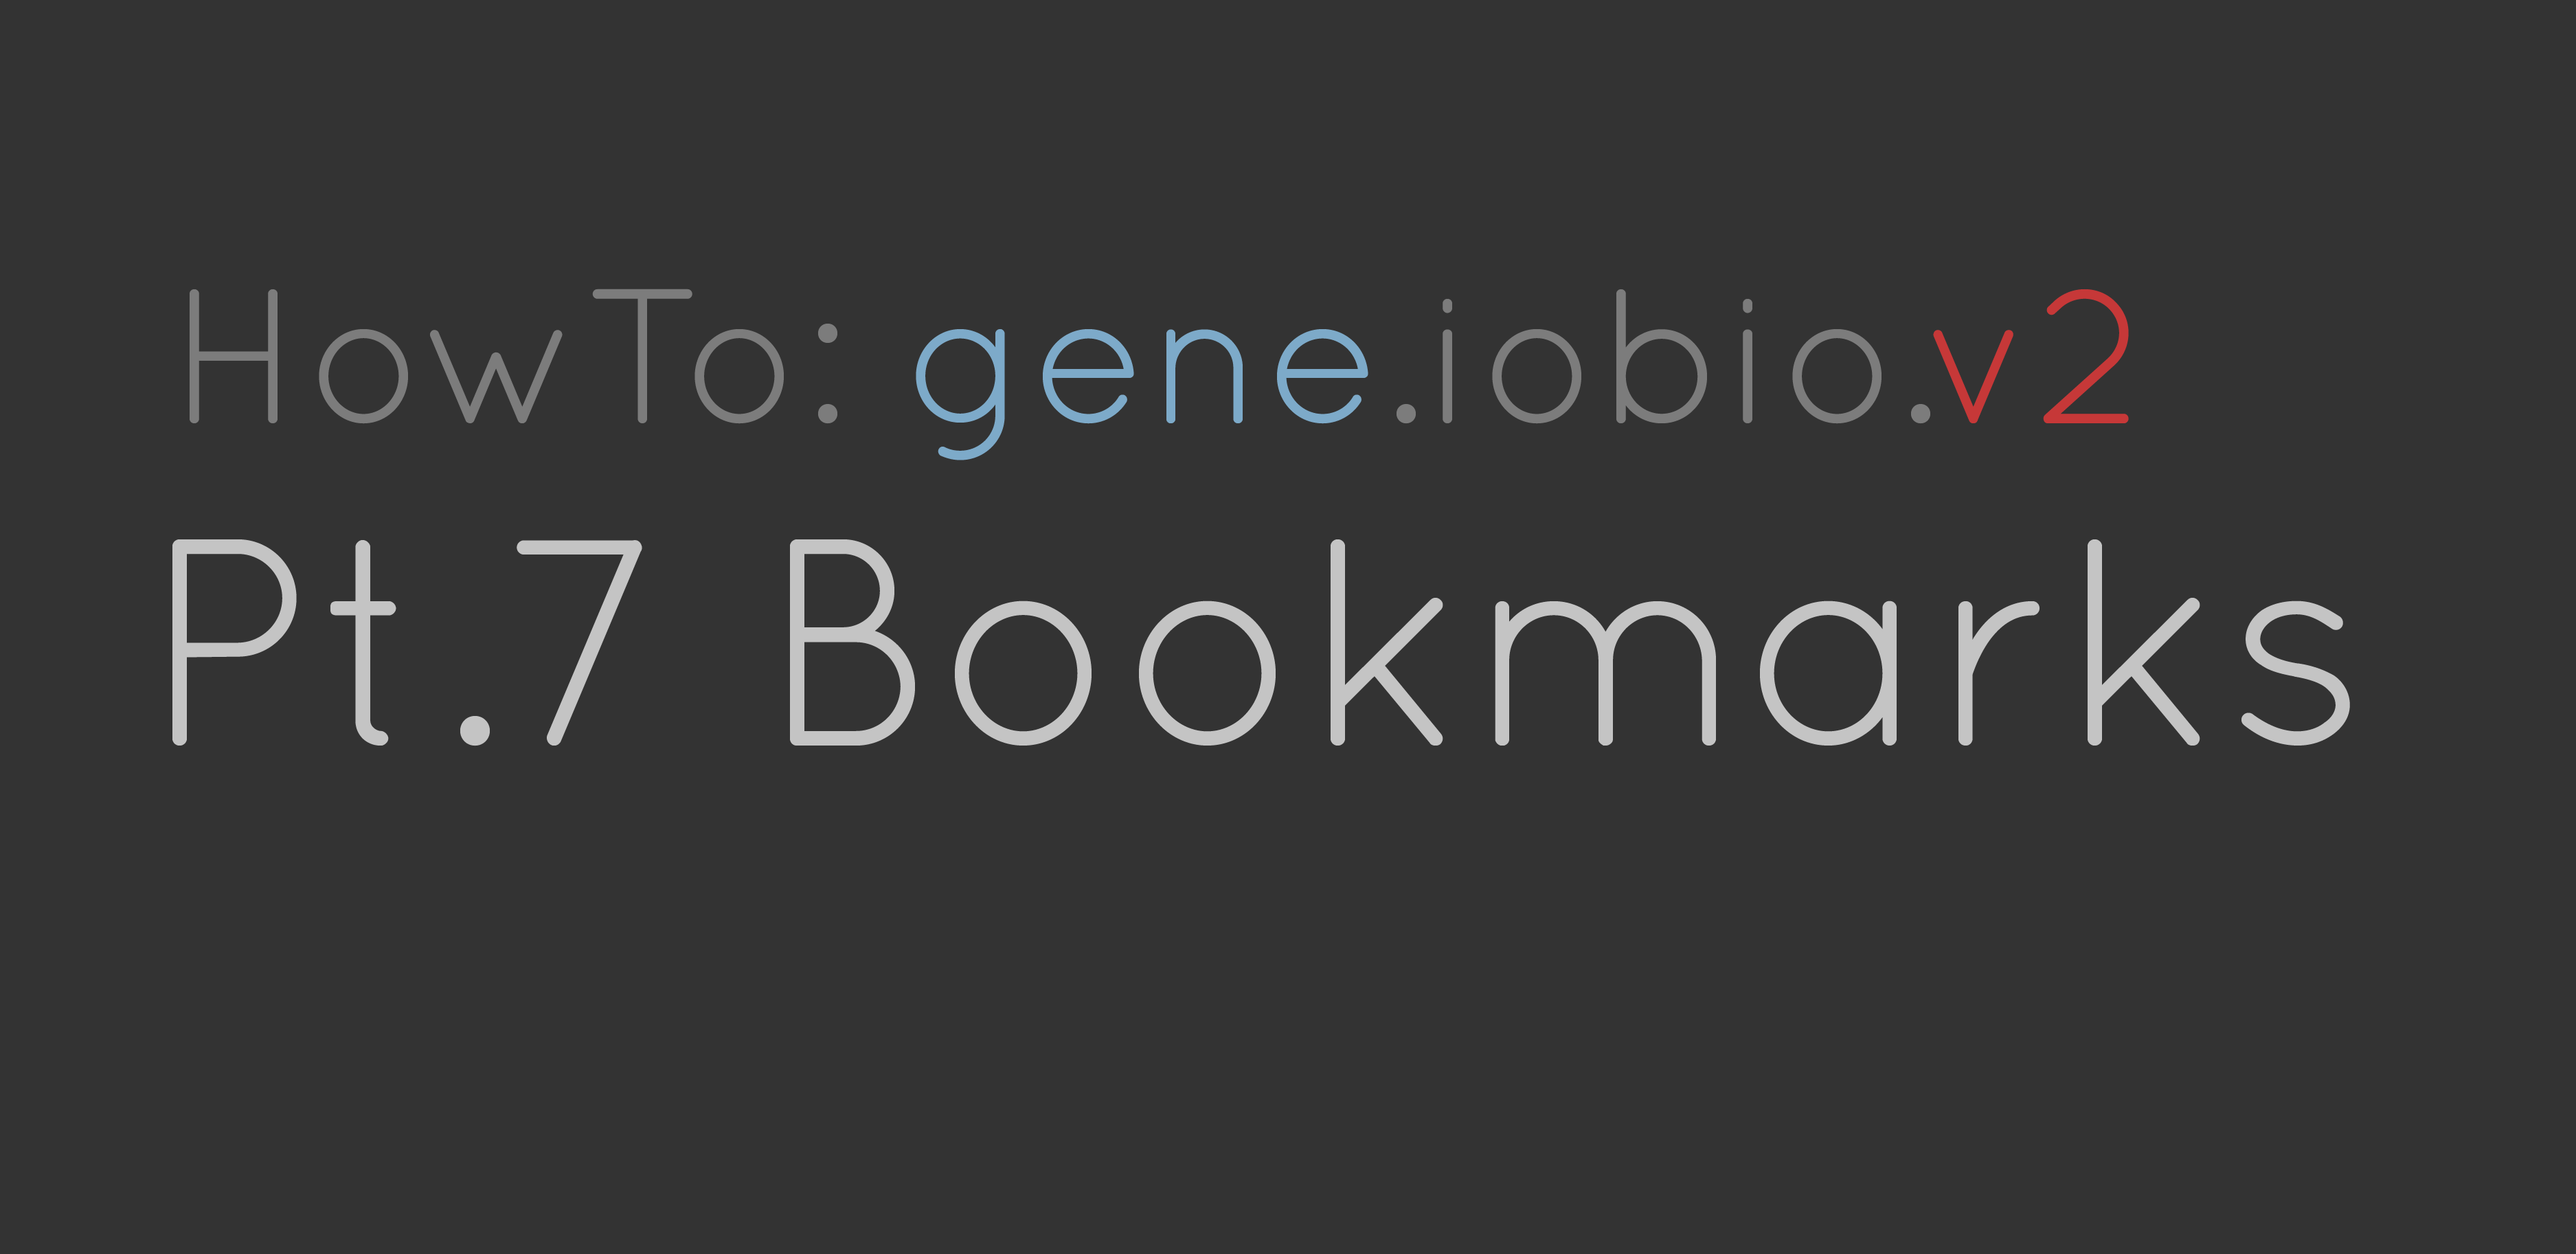 Using bookmarks